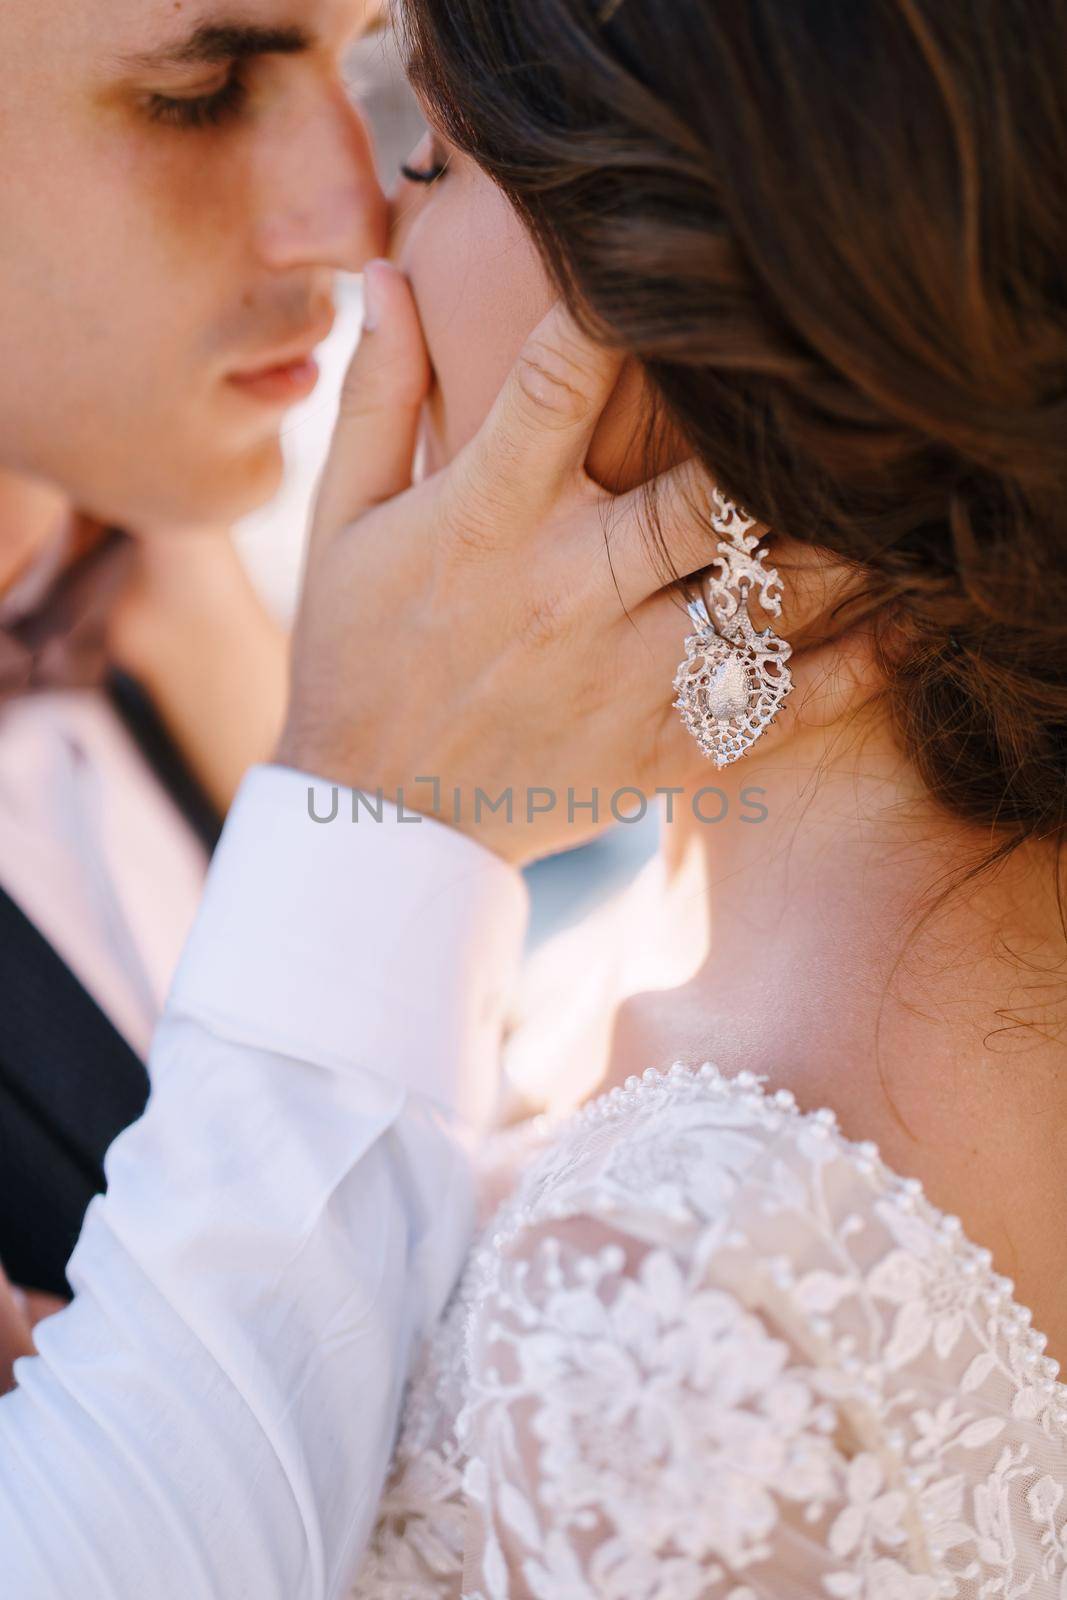 Fine-art wedding photo in Montenegro, Perast. Close-up, the wedding couple is almost kissing. The groom strokes the bride's hand on the cheek.